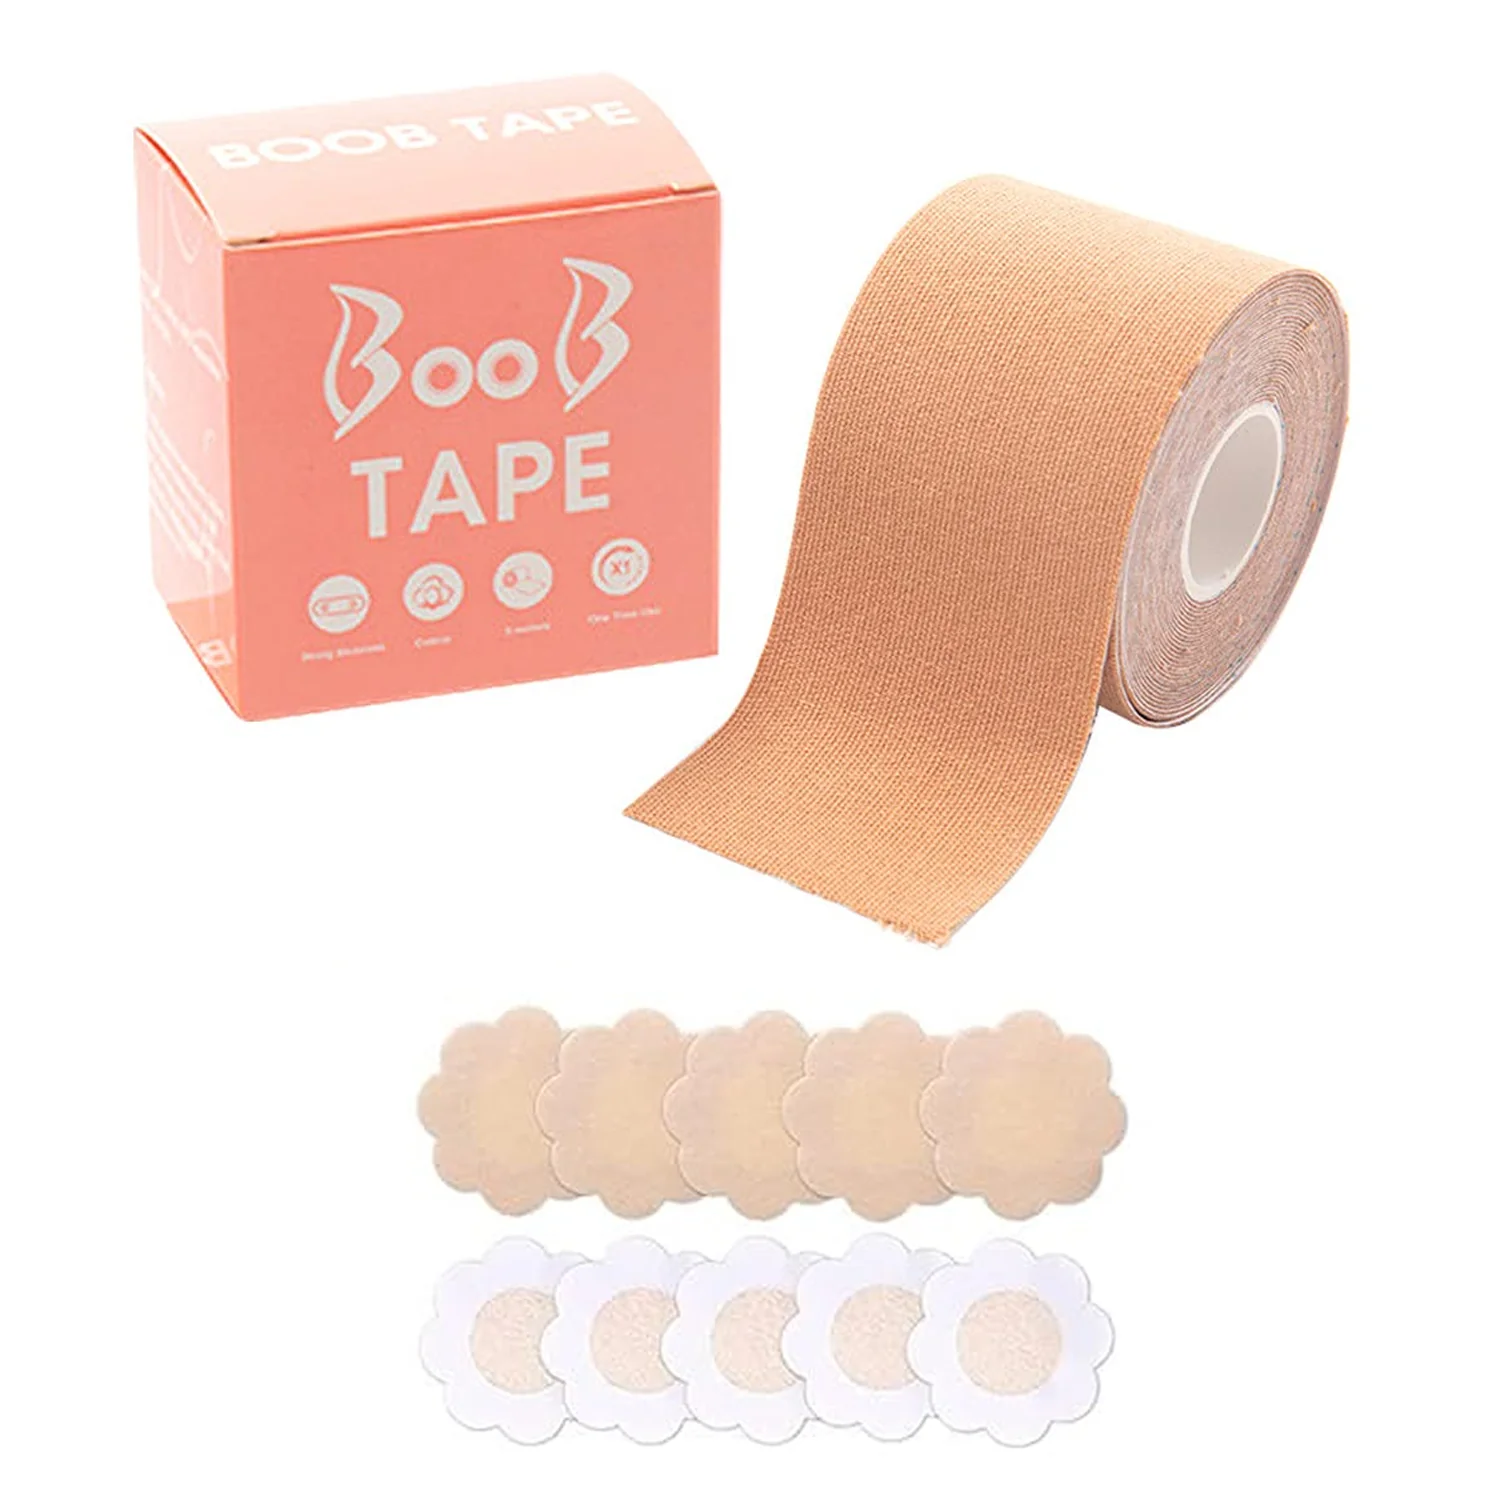 BOOB TAPE WITH 10 PAIRS NIPPLE COVER COTTON WIDE THIN BREAST TAPE